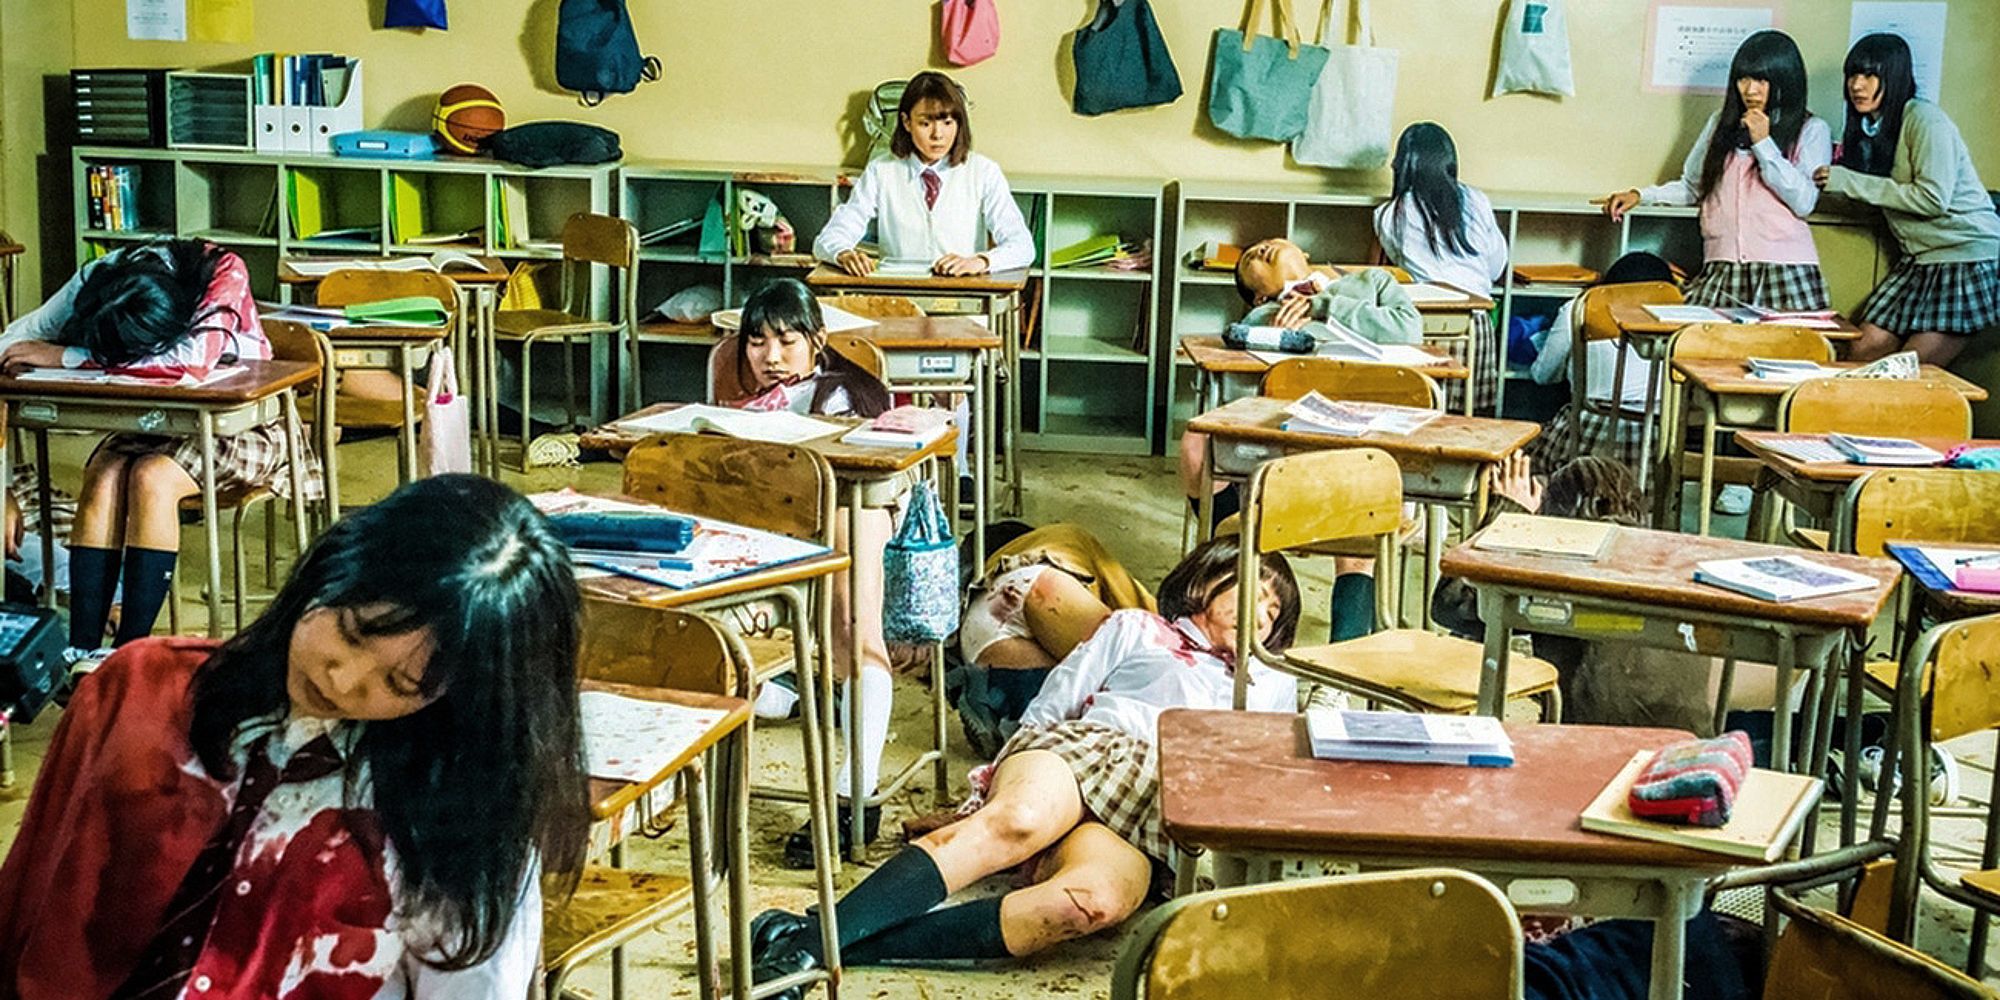 A girl sitting at the back of her class looks on in shock as her classmates lay around her dead and bloodied.